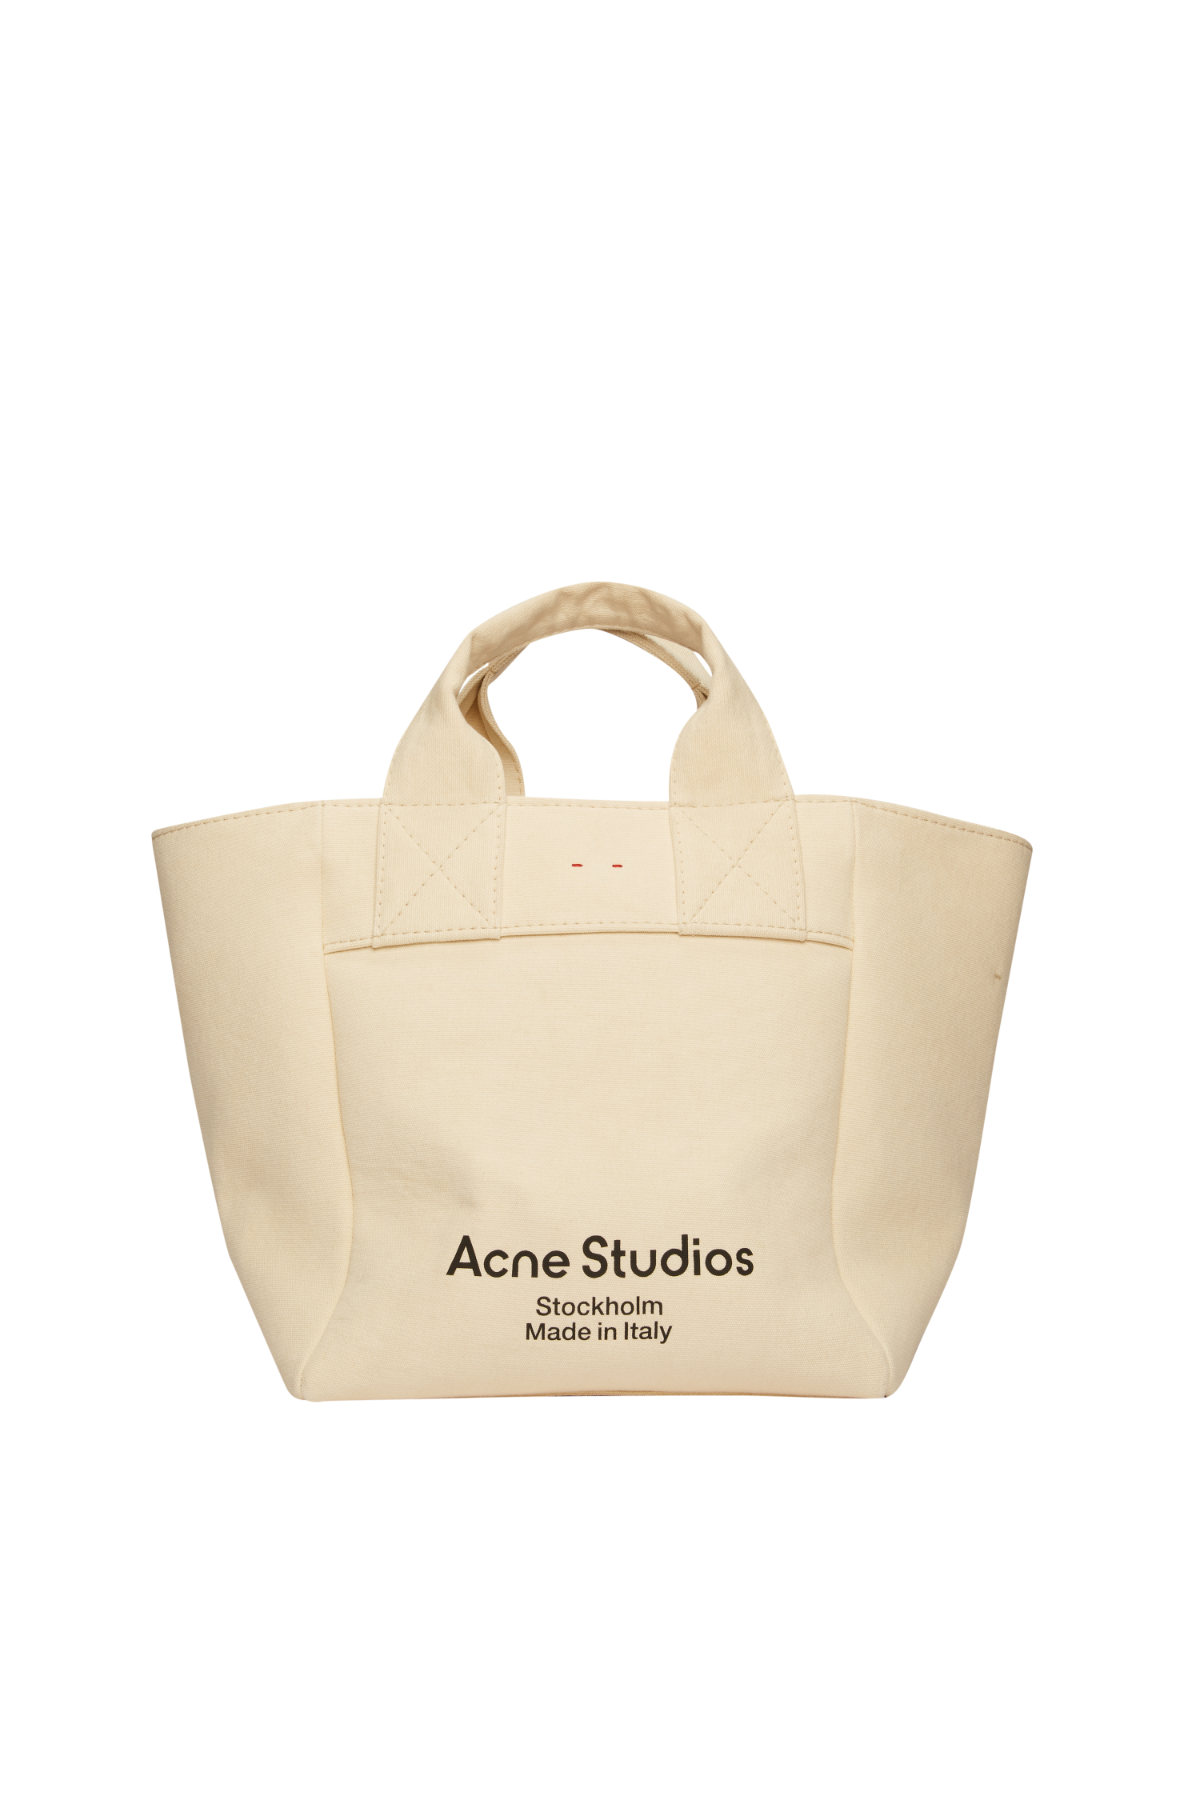 Acne Studios Features Bandanas And Canvas Bags, With Photography By Anders Edström